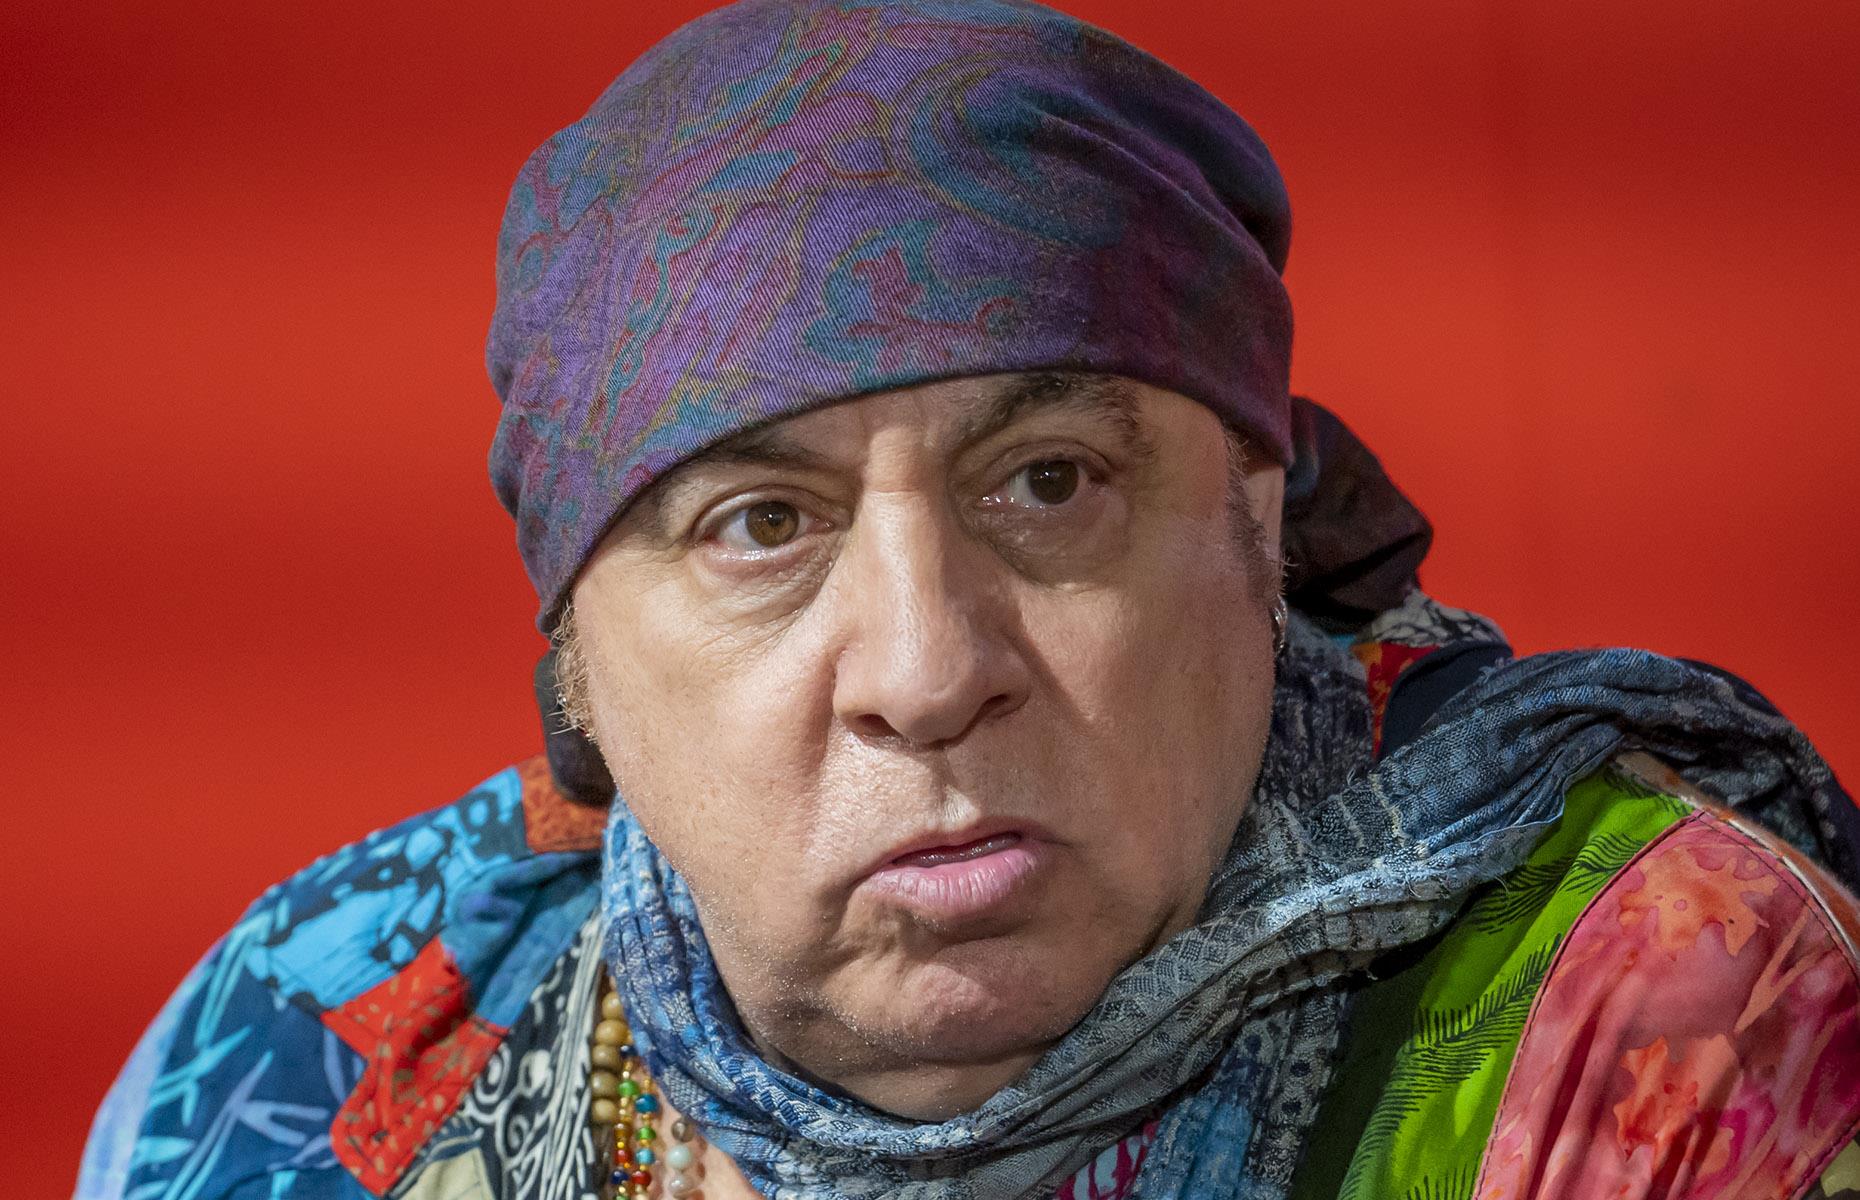 <p>Van Zandt has continued performing with the E Street Band and is currently part of the ongoing Springsteen and E Street Band 2023 Tour line-up.</p>  <p>He still acts, most notably starring in the Netflix crime drama <em>Lilyhammer</em> between 2012 and 2014. His most recent big-screen performance was alongside Robert De Niro and Al Pacino in the critically acclaimed 2019 film<em> The Irishman.</em></p>  <p>The multi-talented star is estimated to be worth a staggering $80 million (£64m) today.  </p>  <p><strong>Now let's take a look at two</strong><strong> unforgettable stars of <em>The Sopranos</em> who are sadly no longer with us...</strong></p>